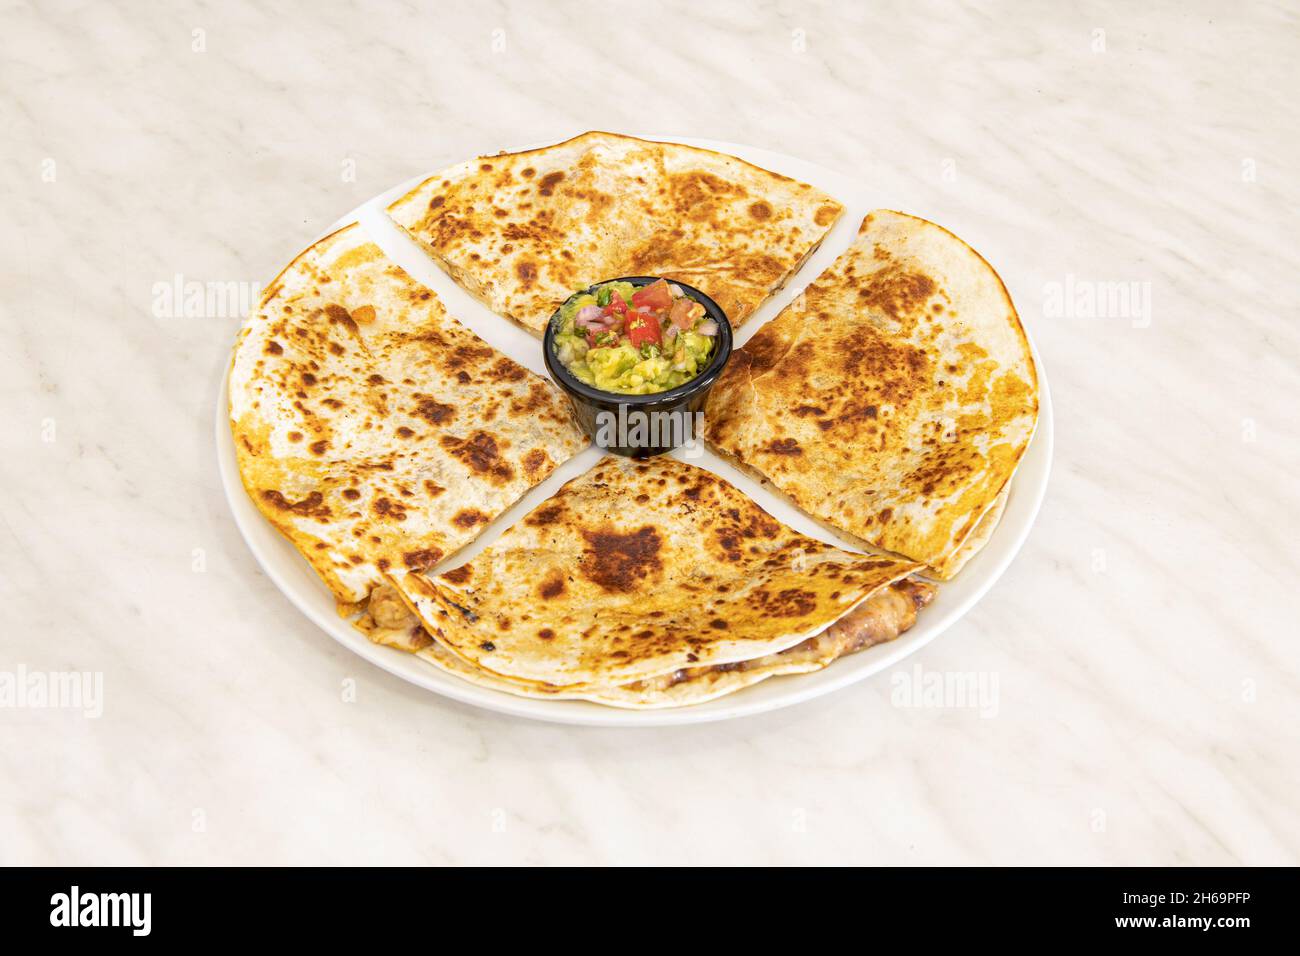 The quesadilla consists of a corn or wheat tortilla, folded in half that can be filled with cheese, beans and chicken and eaten hot, either fried or c Stock Photo